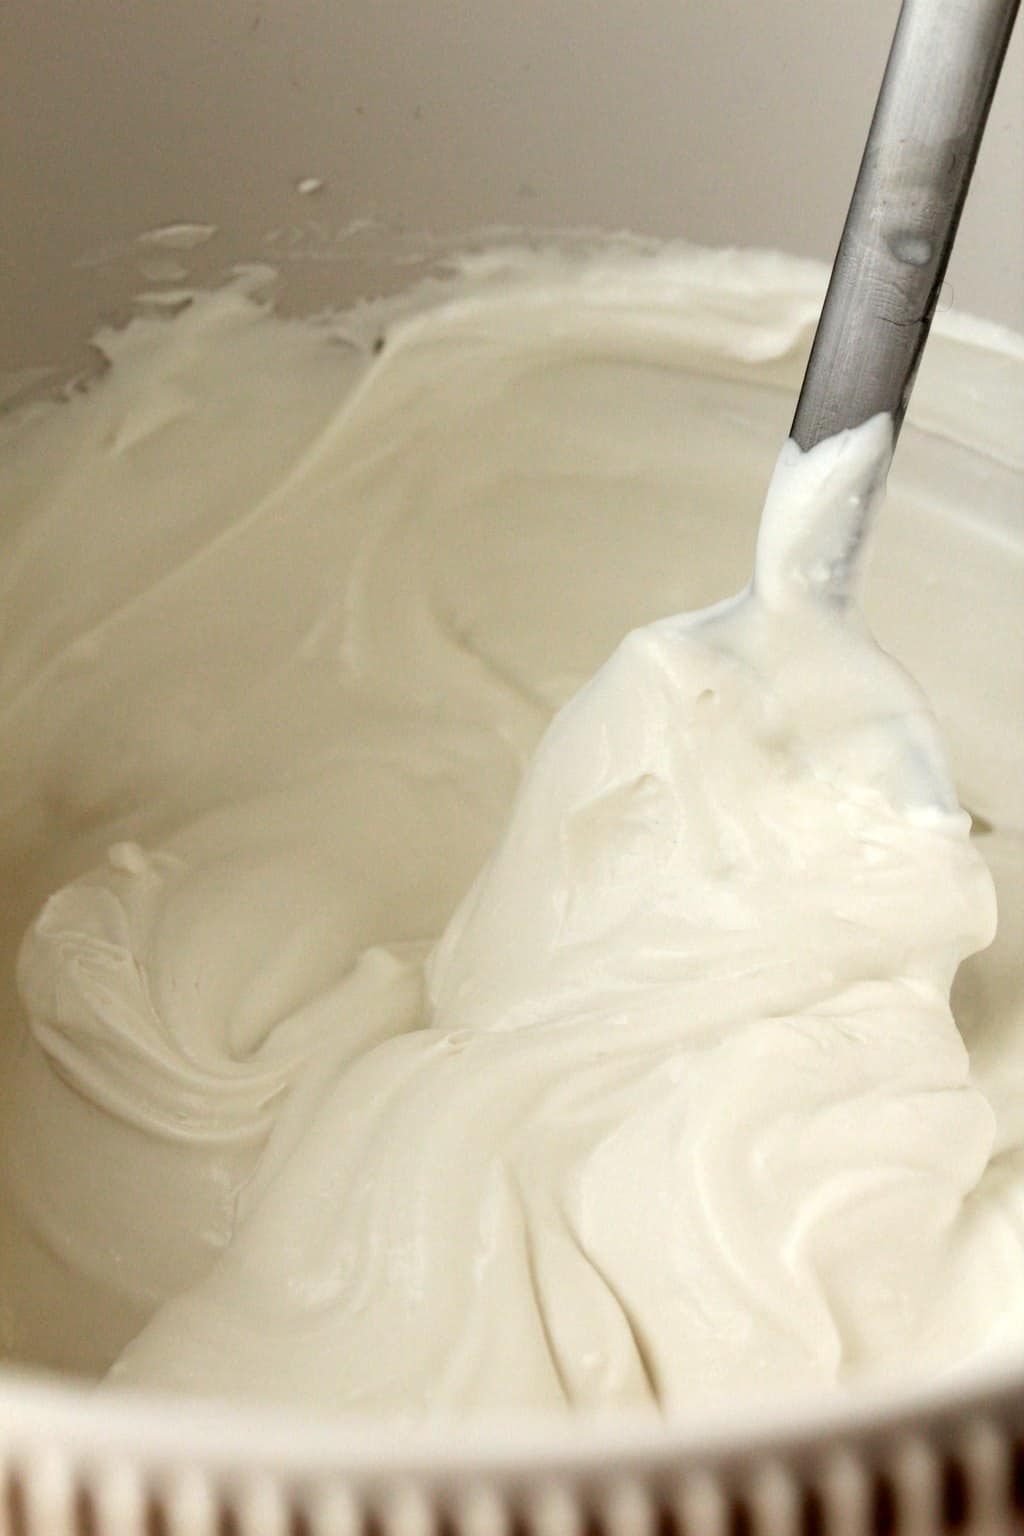 Vegan whipped cream in a stand mixer.